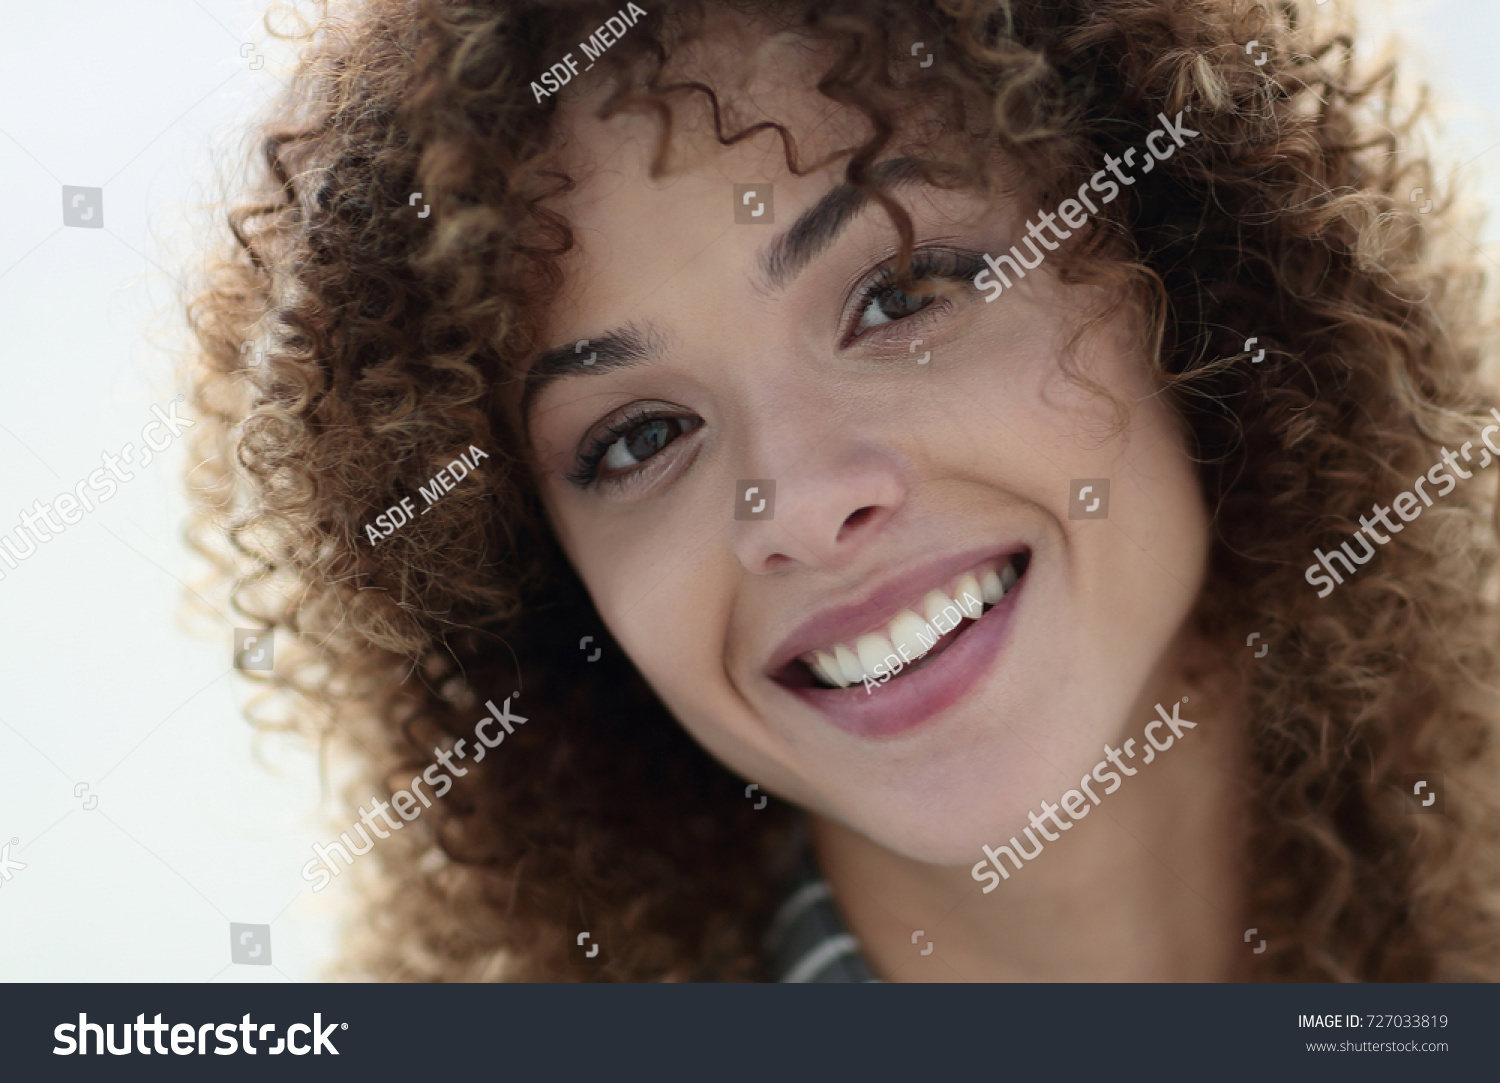 Close-up face of beautiful young woman with curly hair #727033819